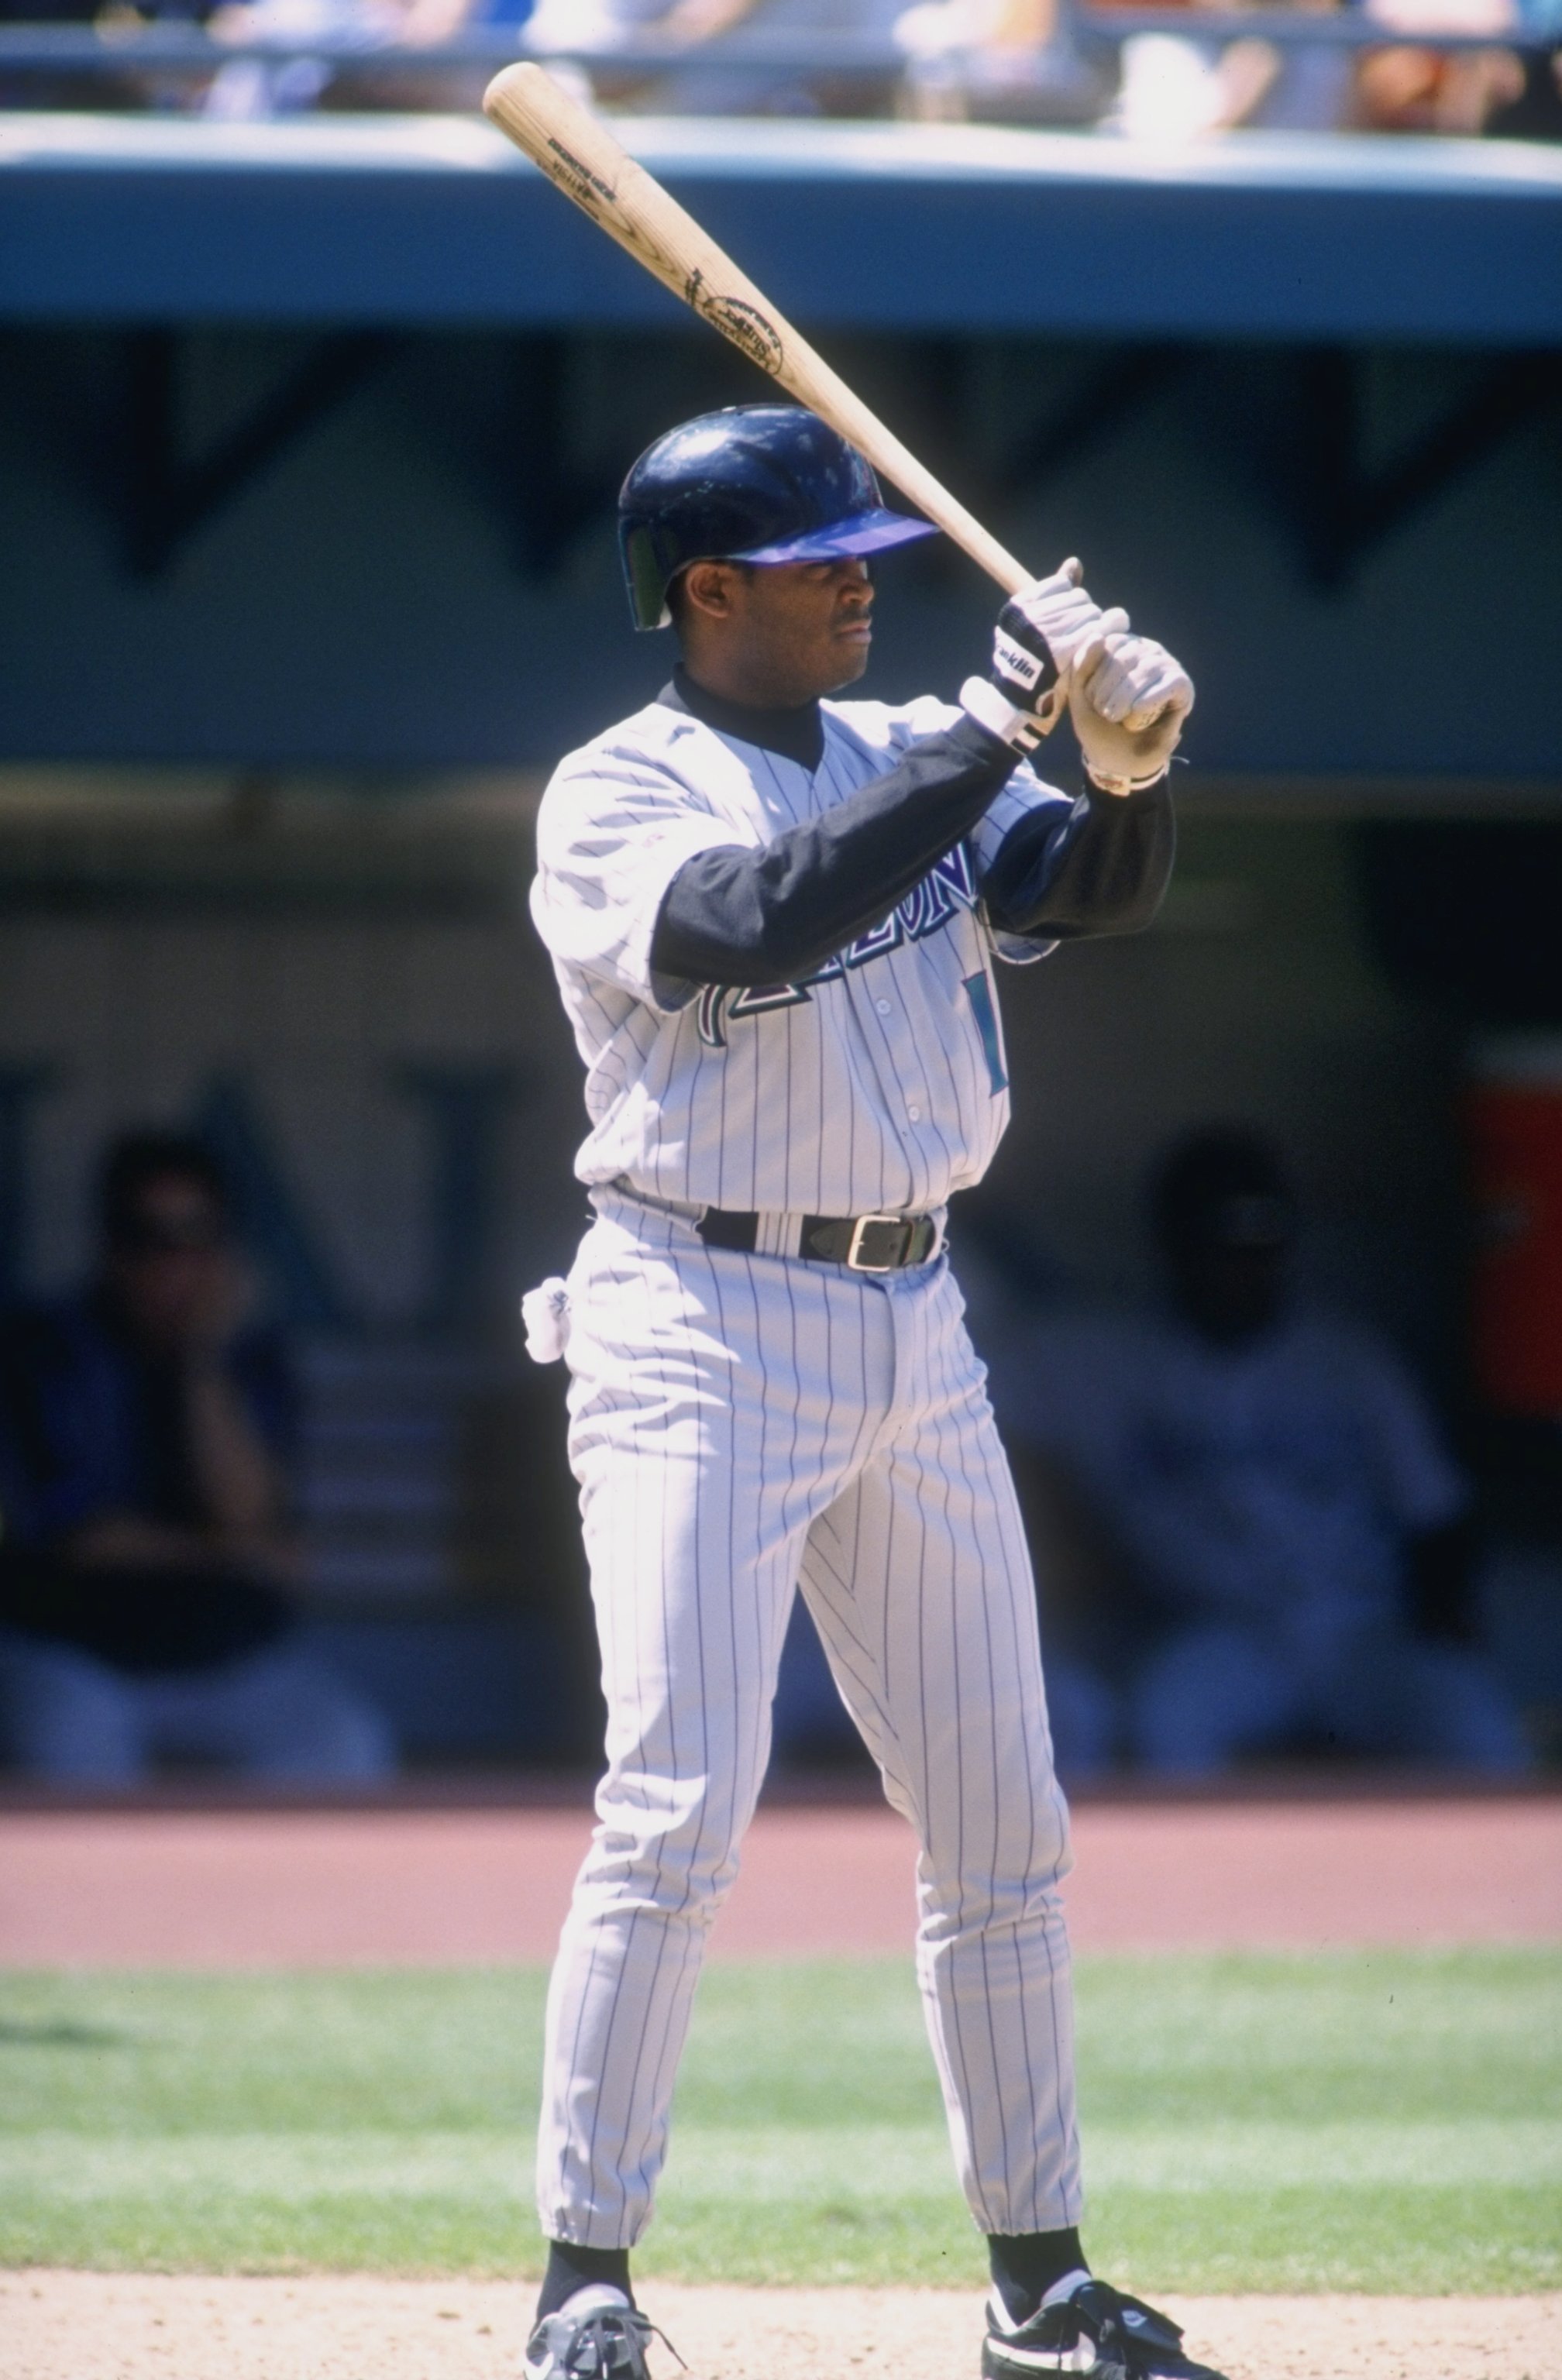 Remembering the weirdest batting stances in Yankee history